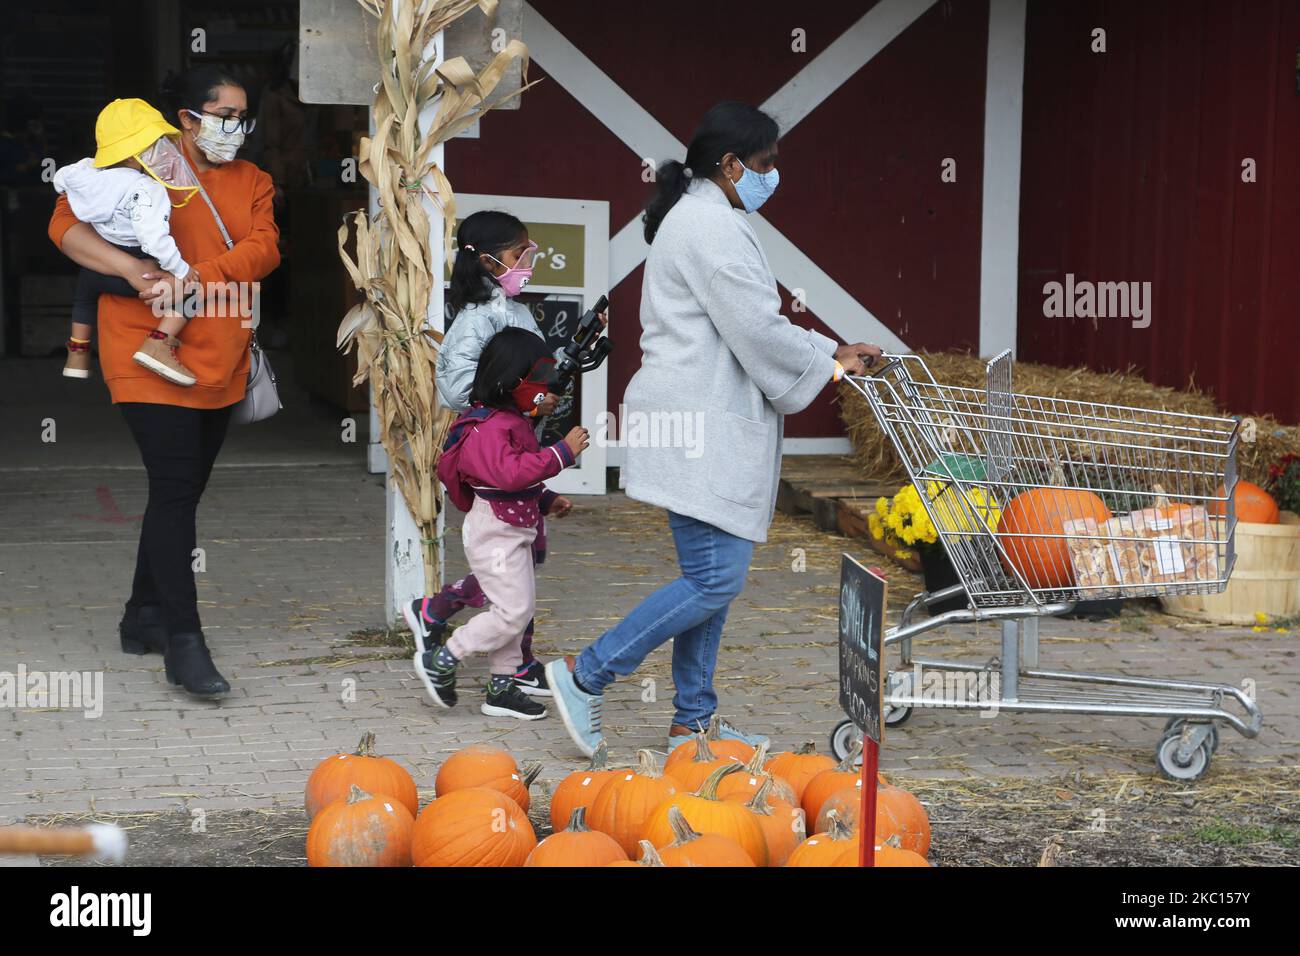 People wearing face masks and face shields to protect them from the novel coronavirus (COVID-19) while selecting pumpkins for Thanksgiving and Halloween at a farm in Markham, Ontario, Canada, on October 03, 2020. Cases of COVID-19 continue to rise, with record daily numbers across the Greater Toronto Area. Calls to place the city of Toronto back into lockdown to slow the spread of the virus are mounting from healthcare officials. (Photo by Creative Touch Imaging Ltd./NurPhoto) Stock Photo